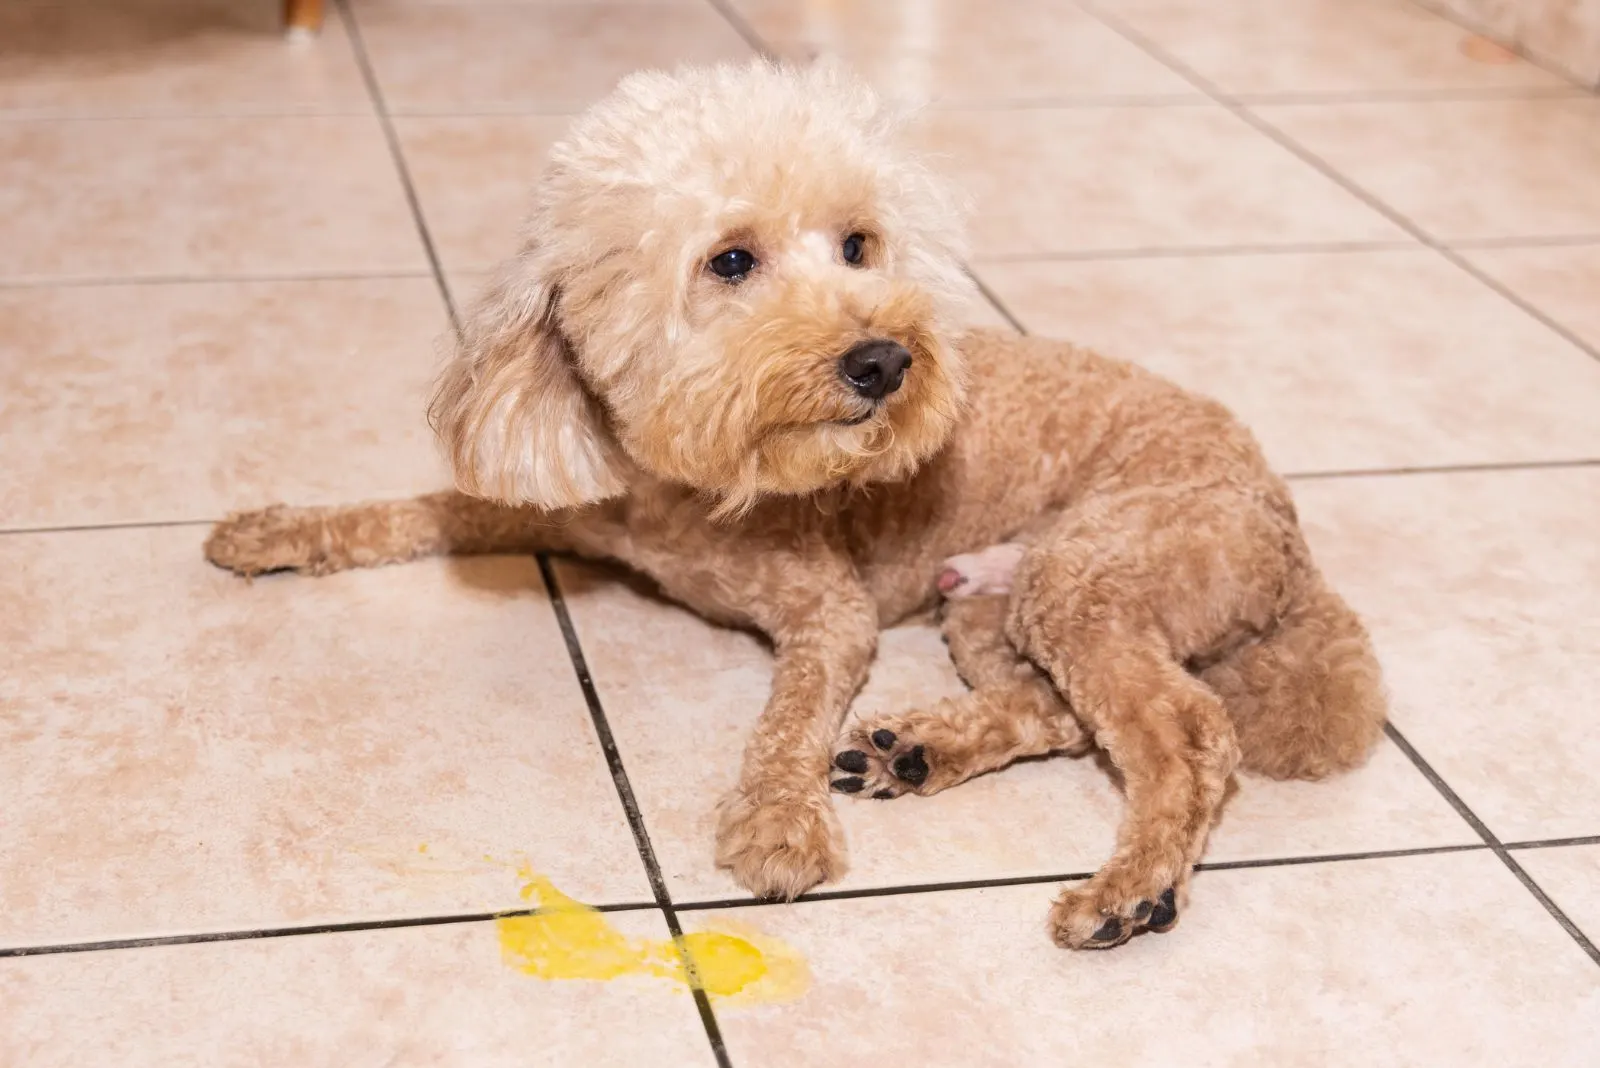 Toy poodle dog vomits yellow substance